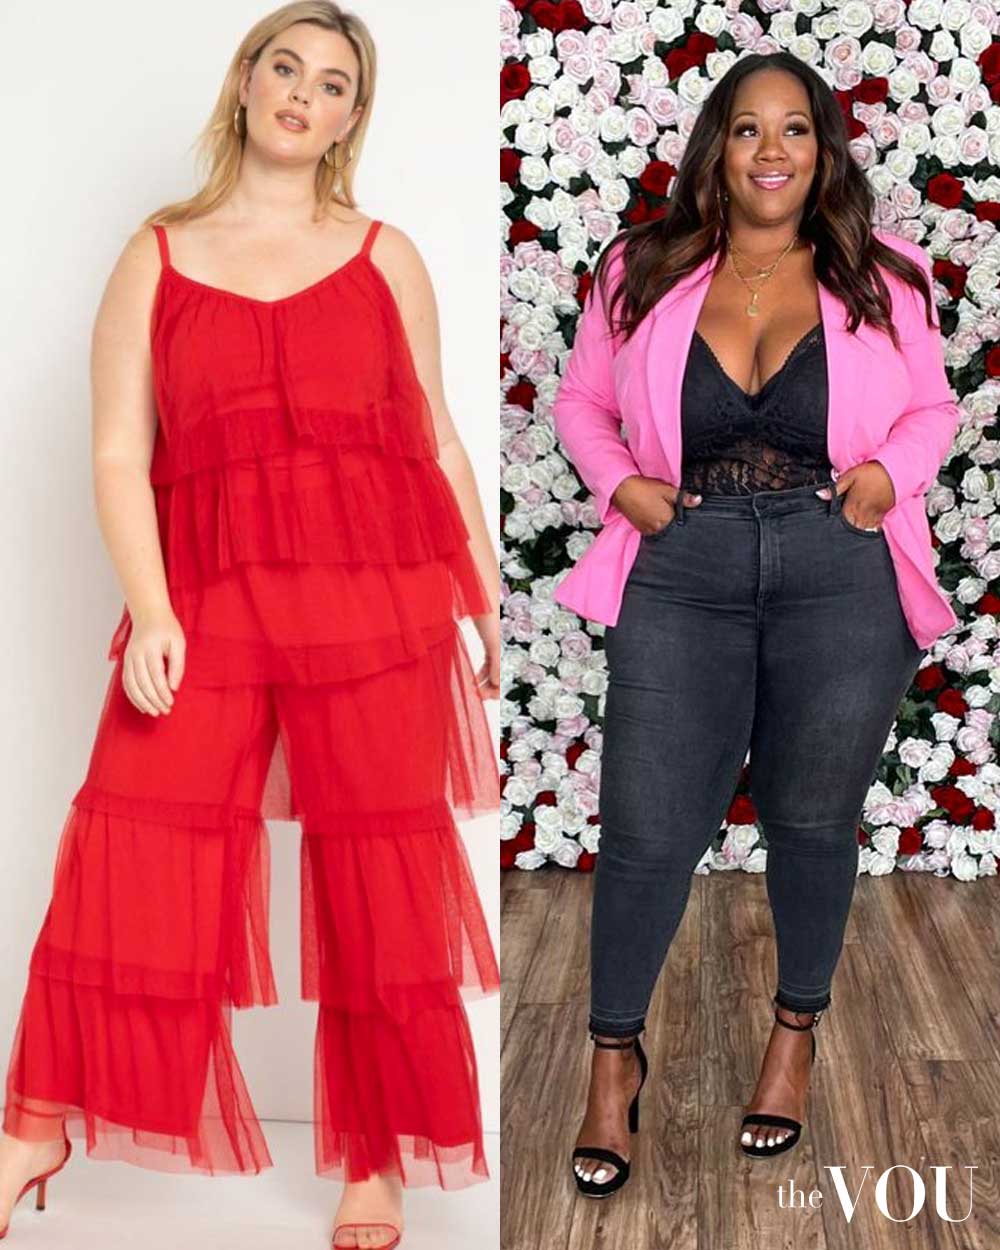 50 Hottest Valentine's Day Outfit Ideas for a Romantic Date Night